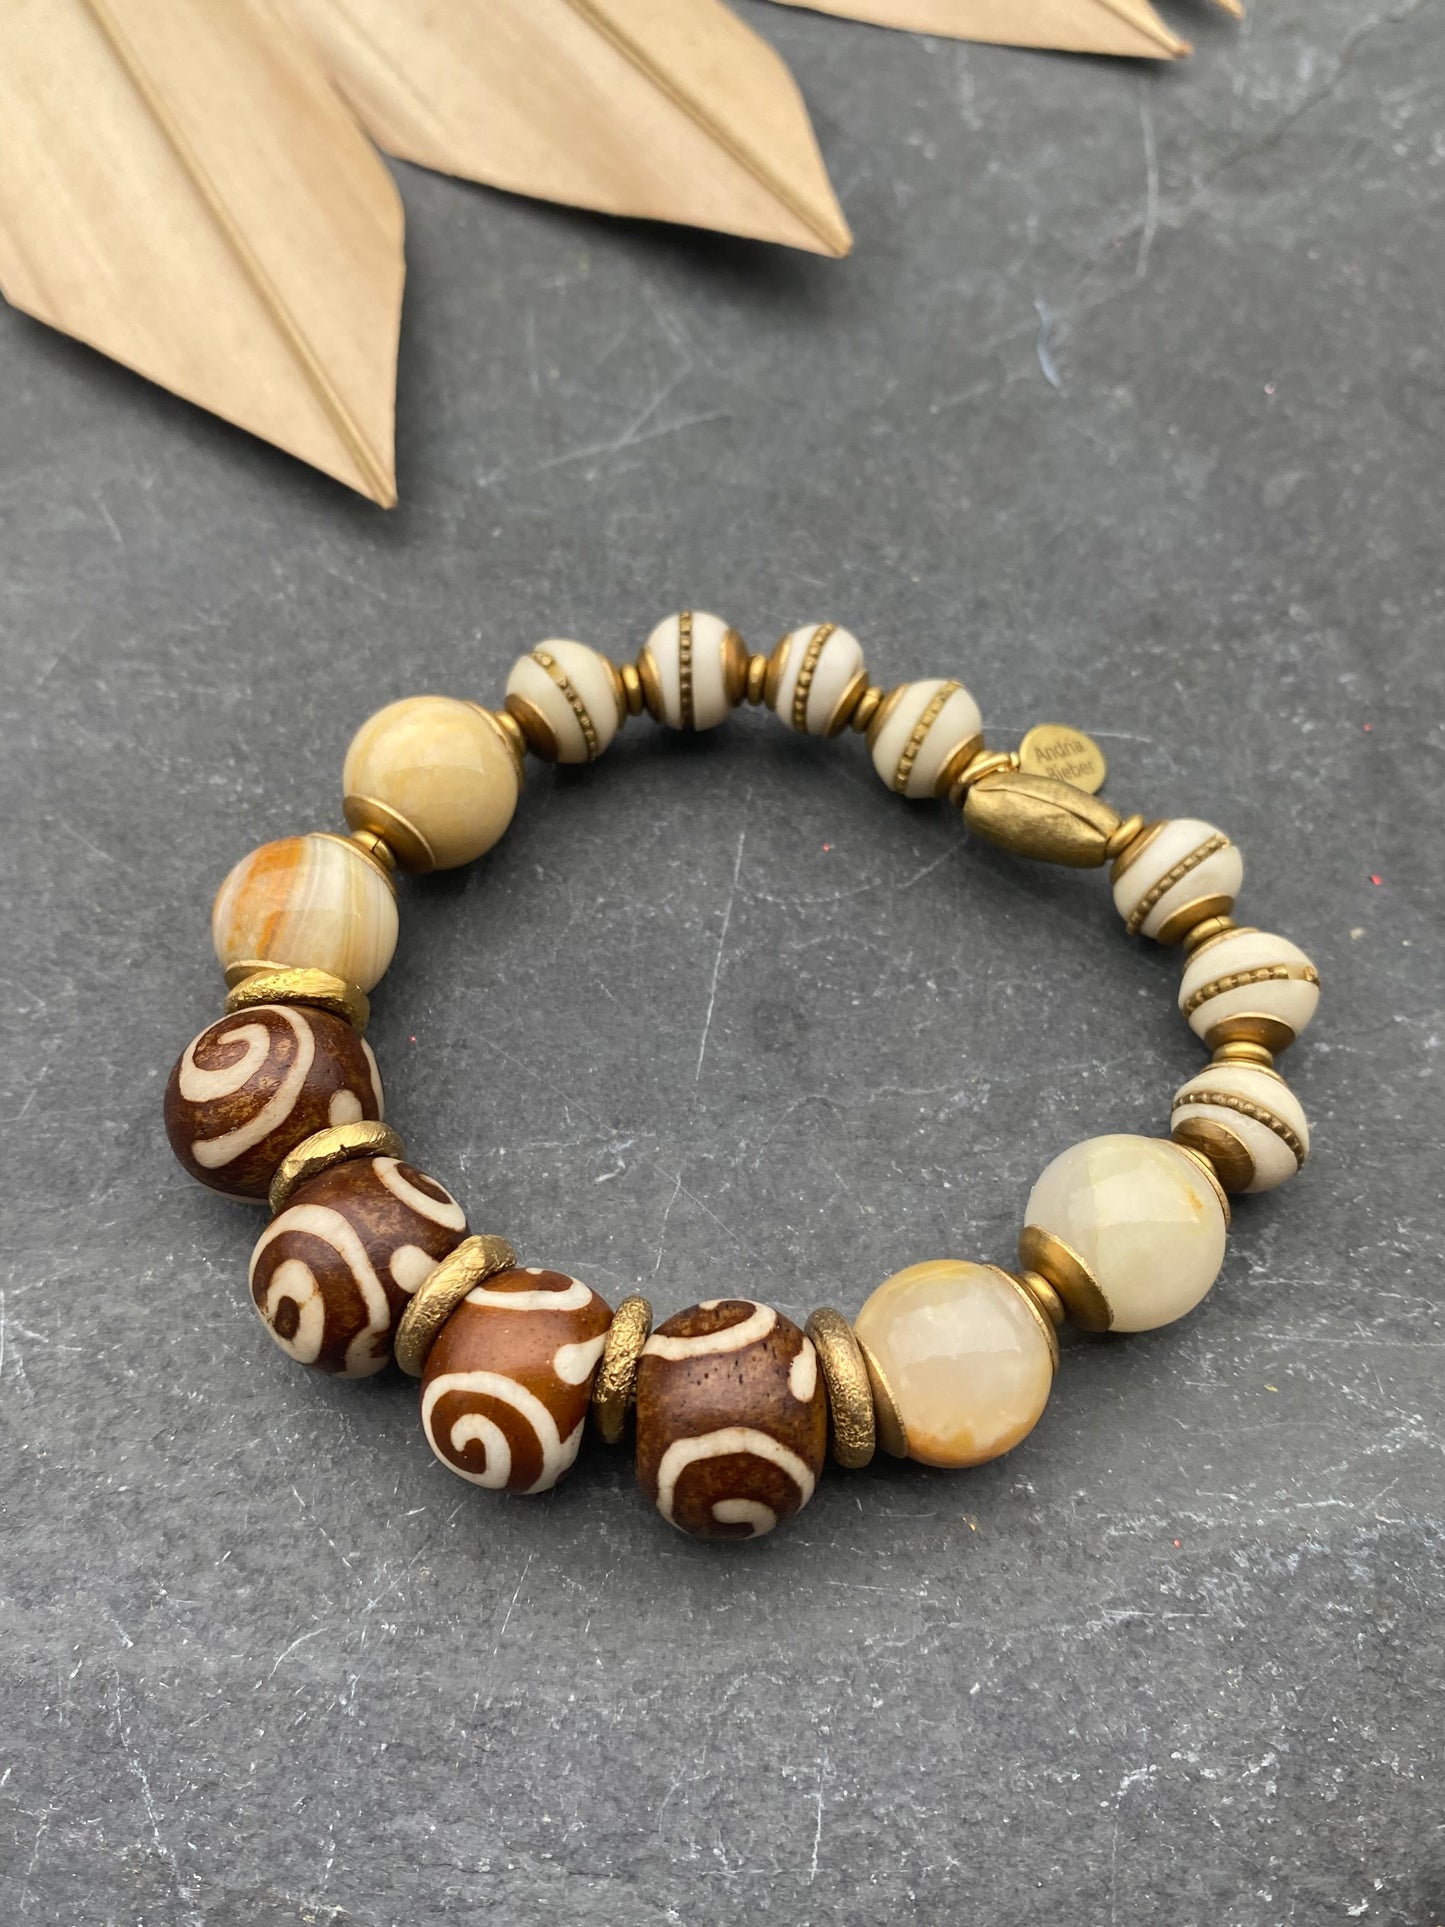 African wood, indoneisan glass, stone, African brass, elastic cording, bracelet, jewelry